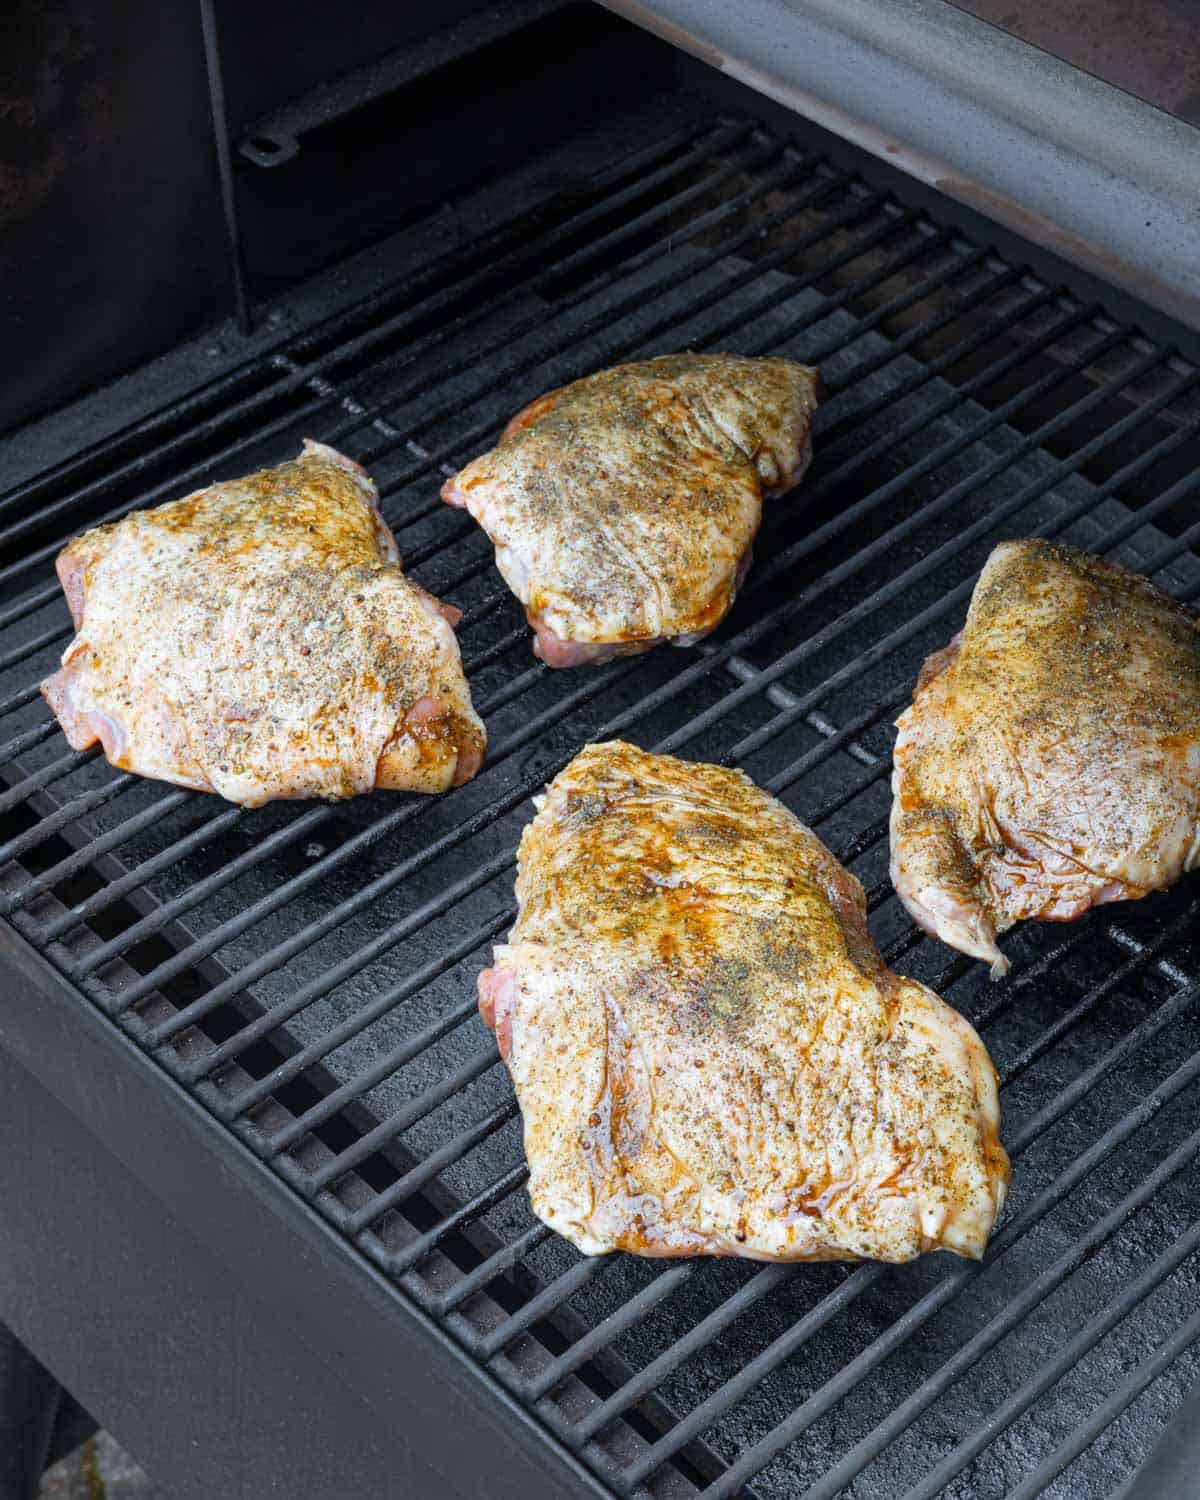 Four seasoned turkey thighs placed skin-side up on smoker grill grates.